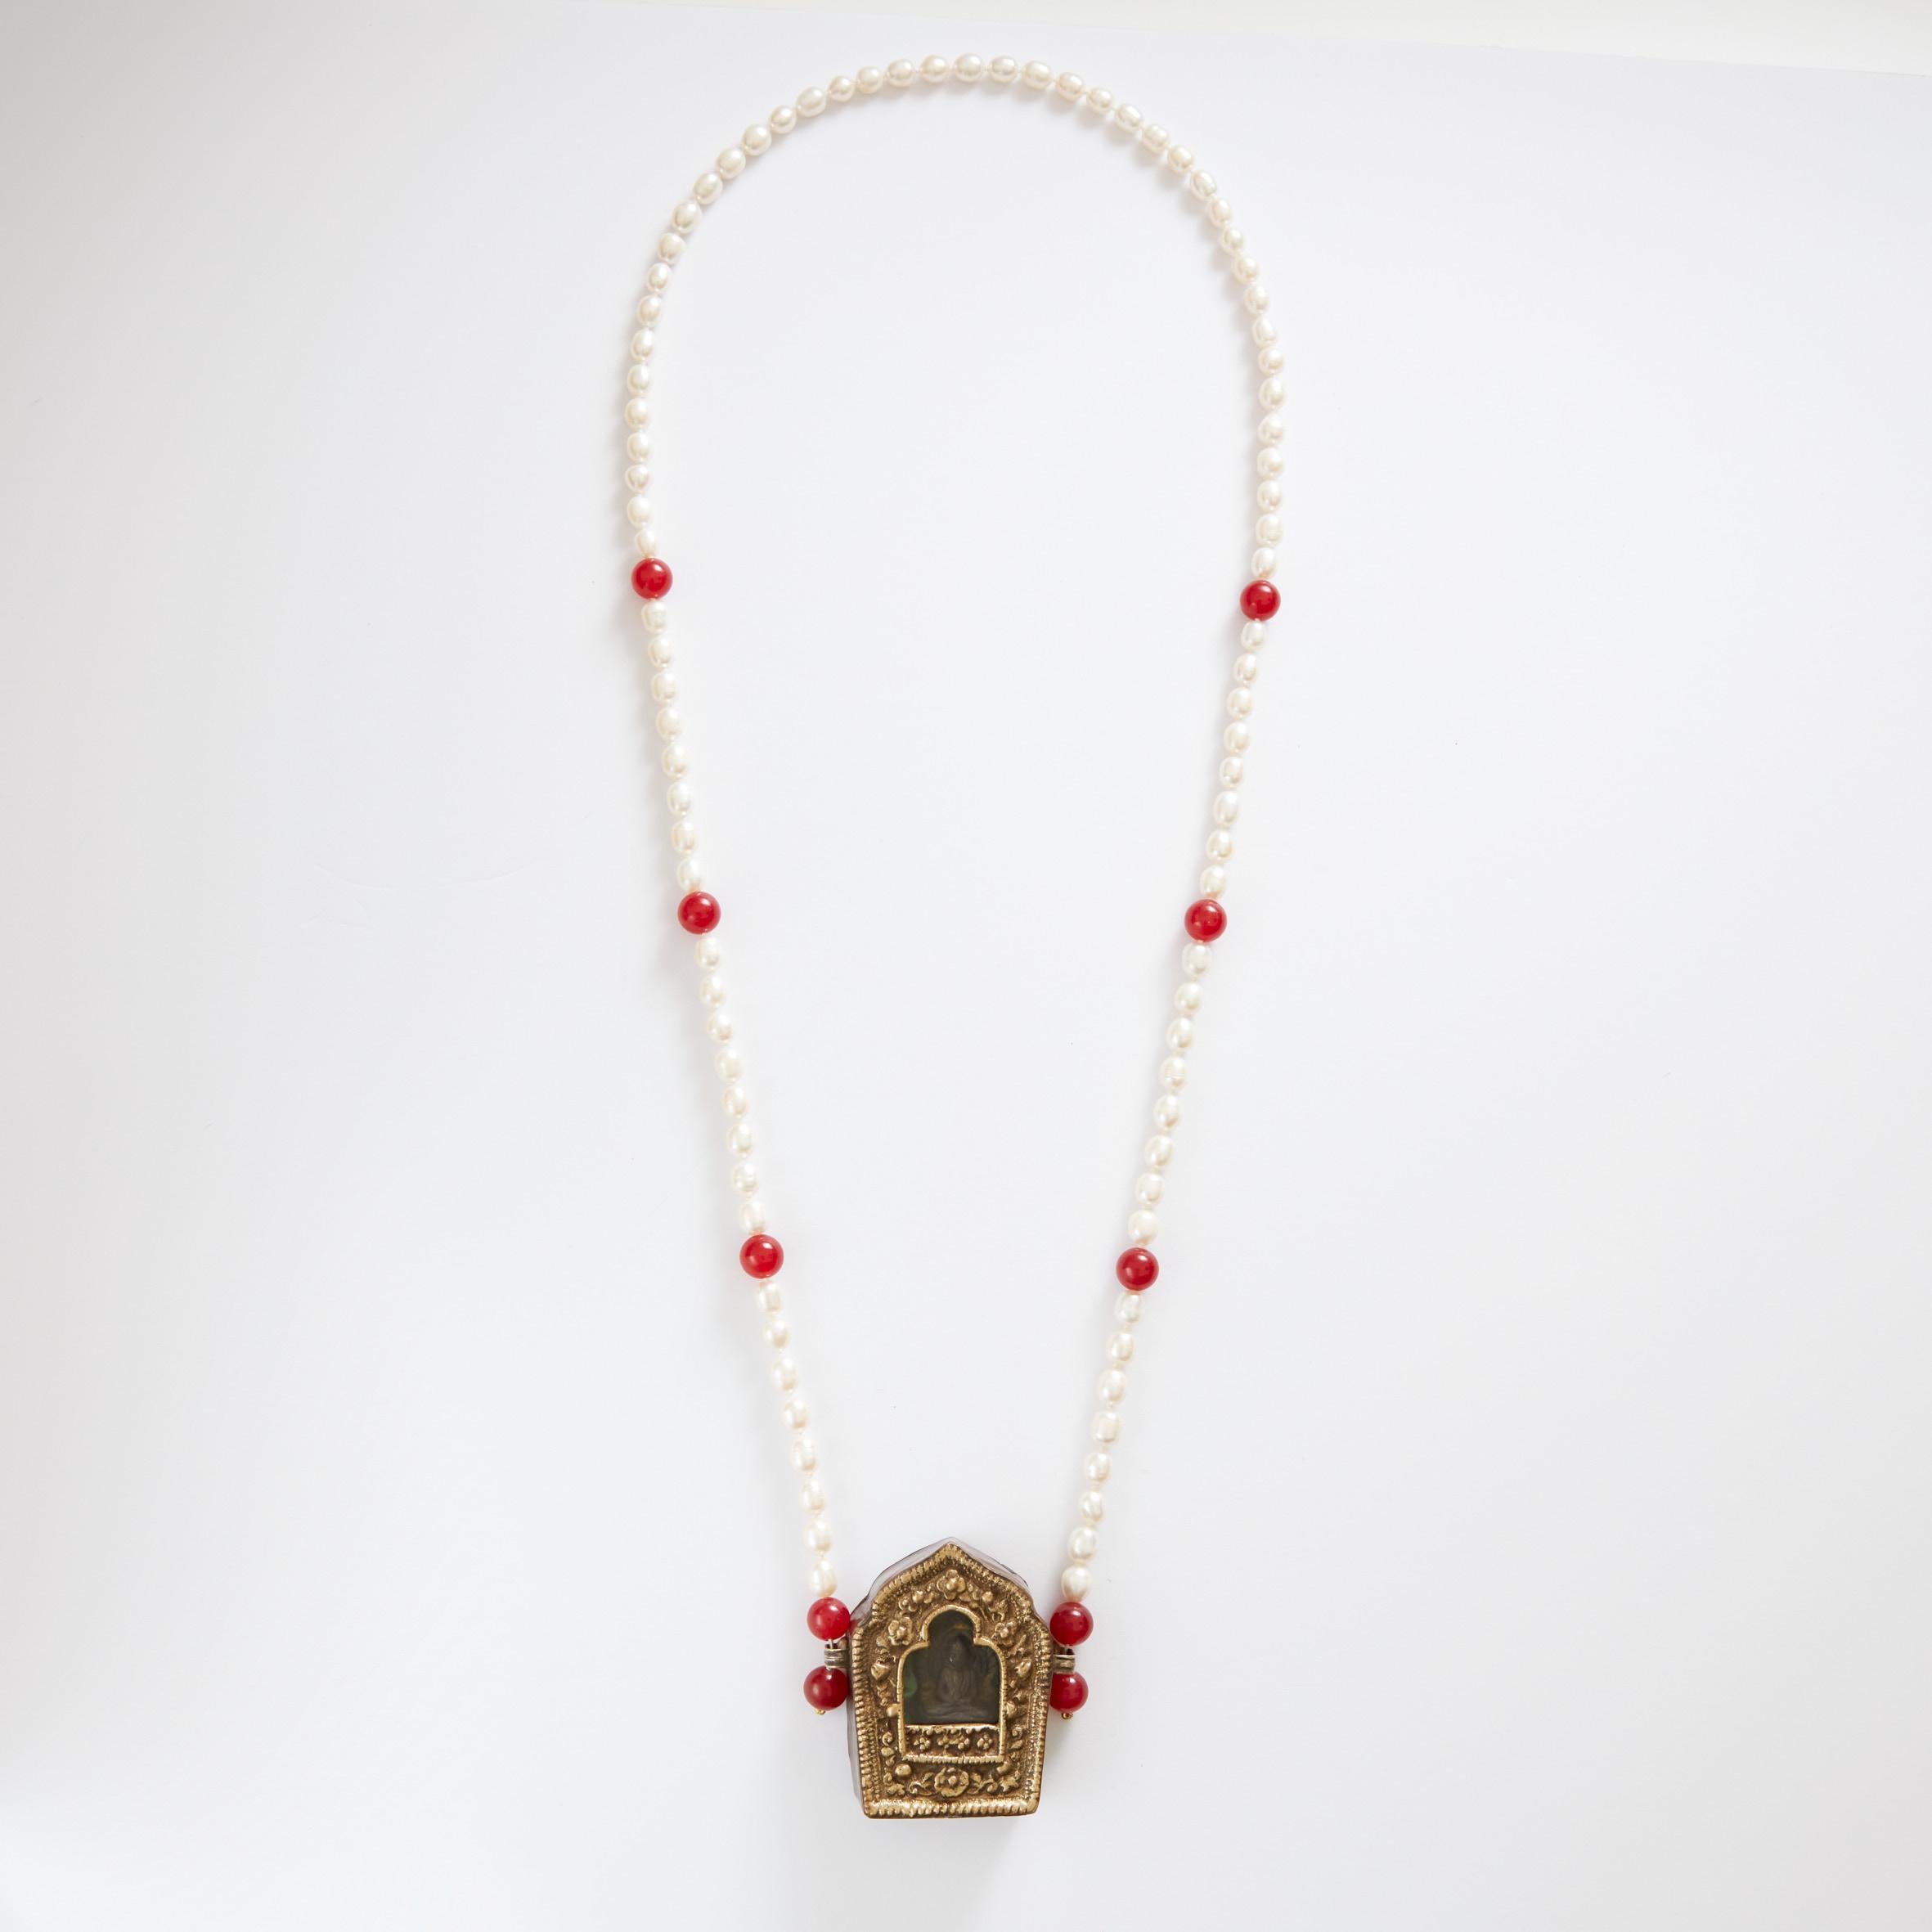 Artist Long Anntique  Mandala With Pearls and Cornelian For Sale